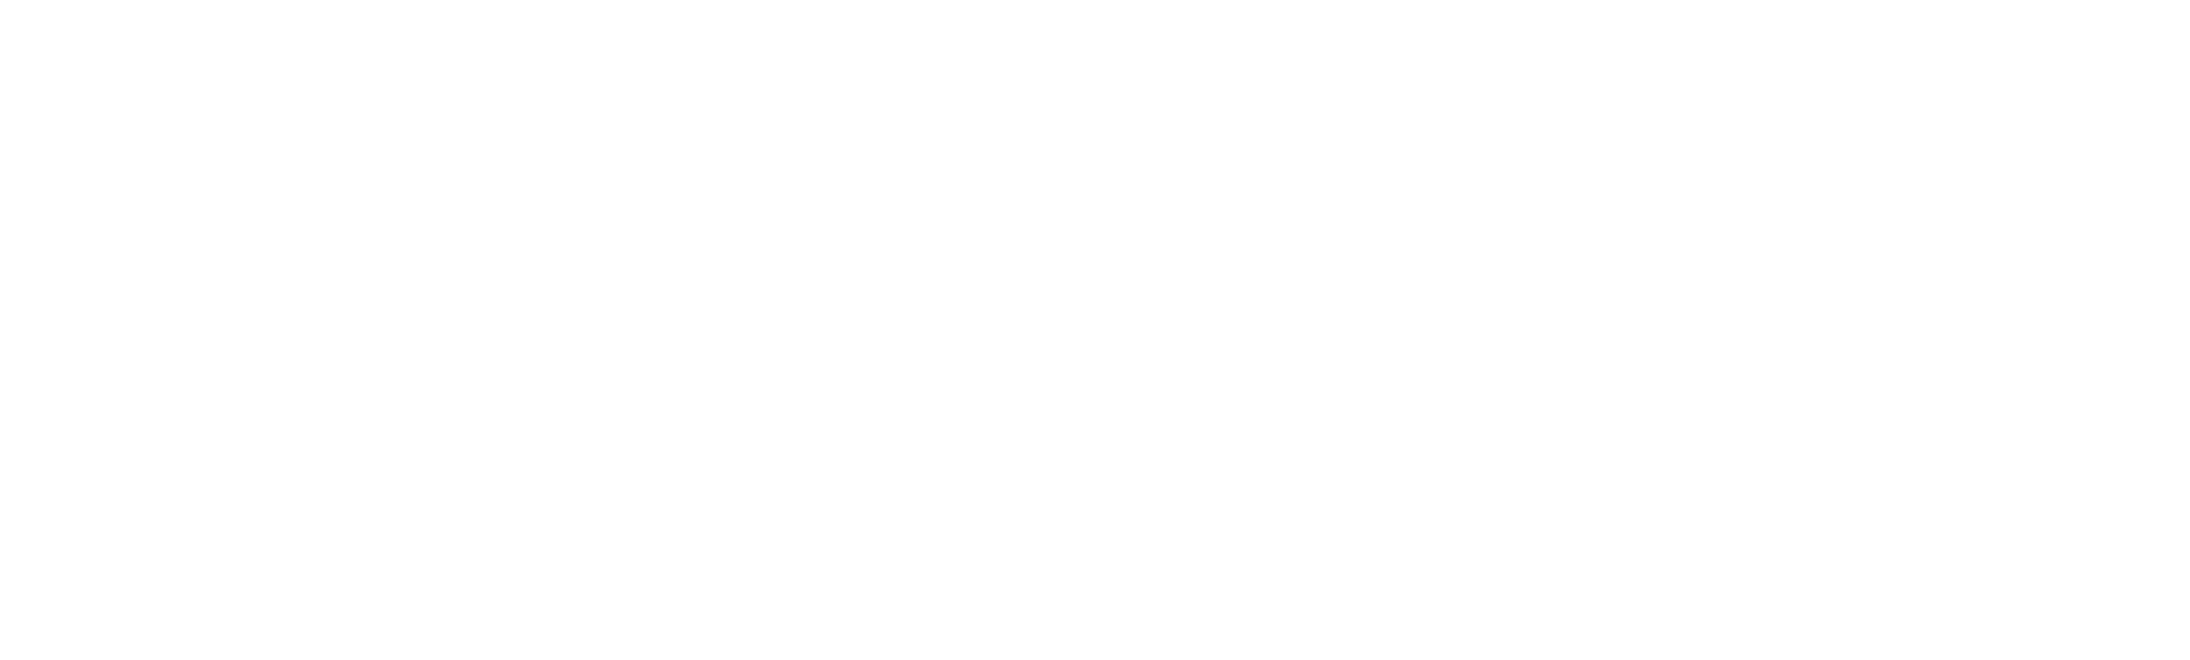 C&F Connect Marketplace